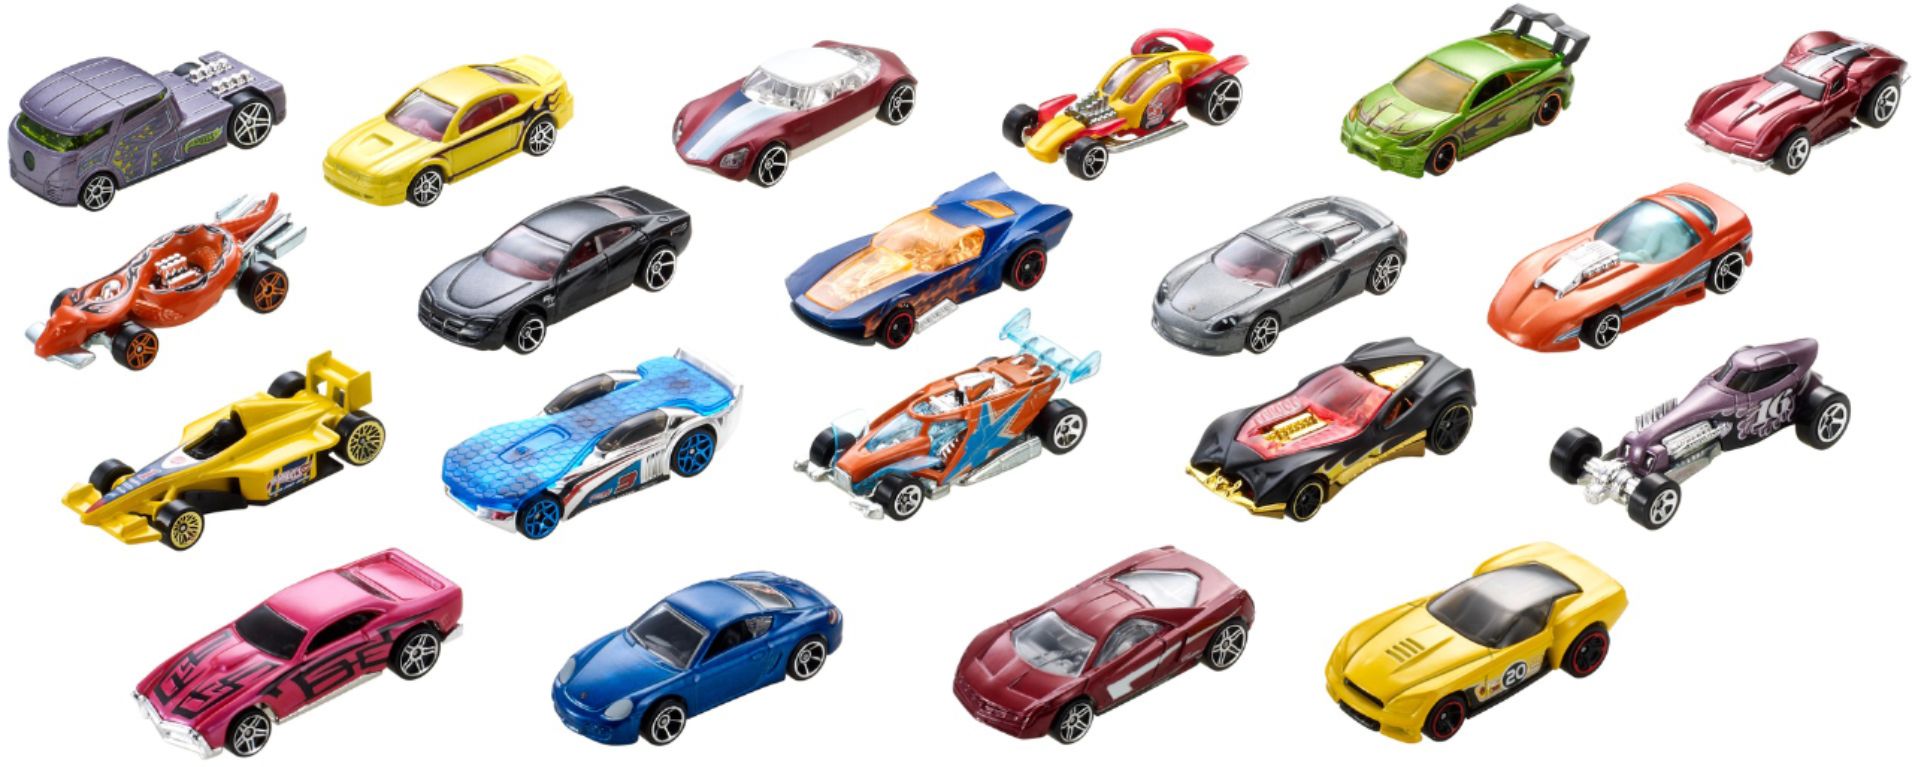 Angle View: Hot Wheels Set of 20 Toy Sports & Race Cars in 1:64 Scale, Collectible Vehicles (Styles May Vary)